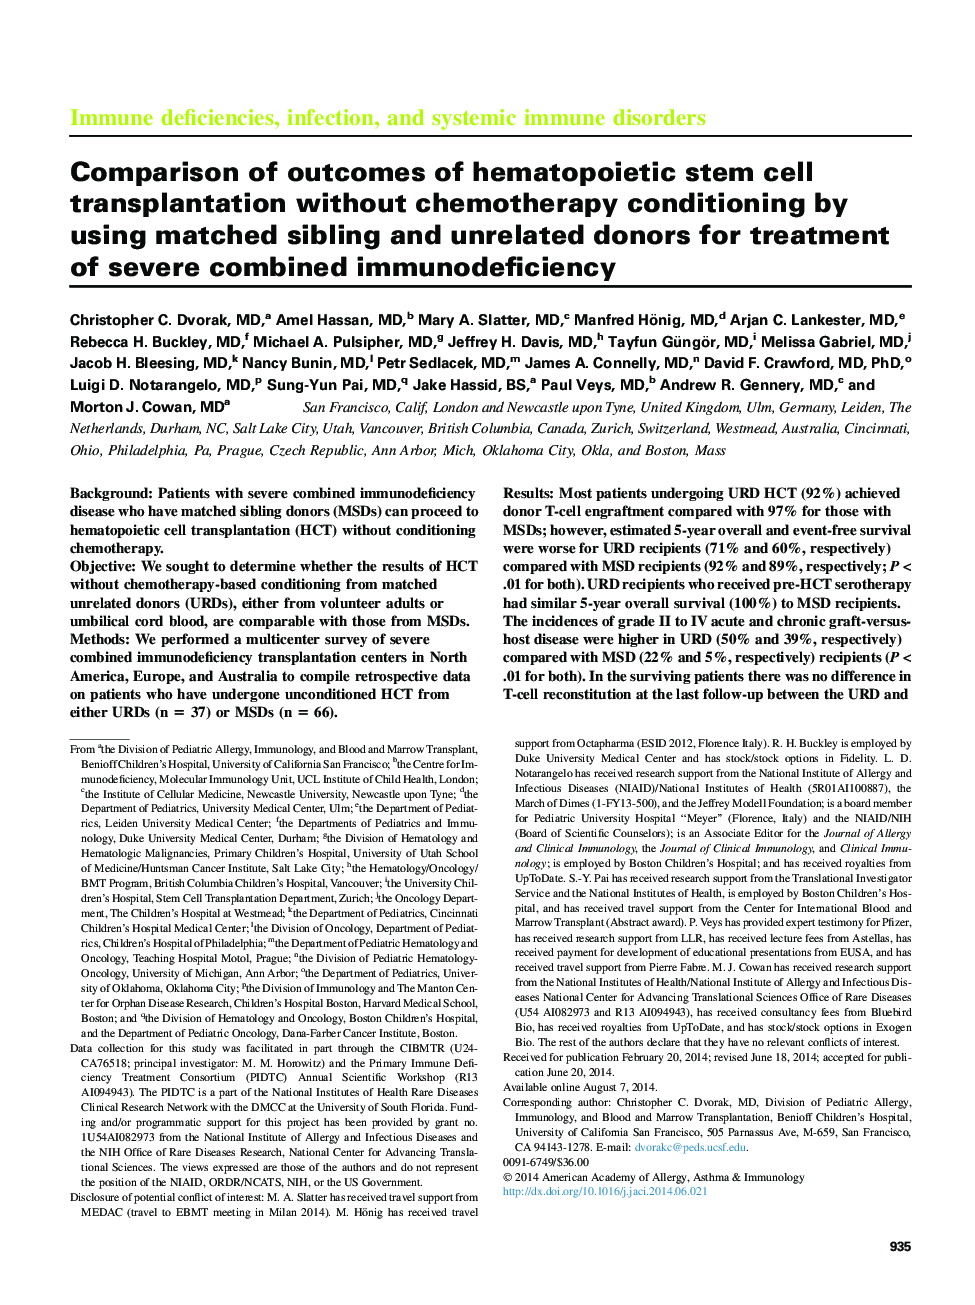 Comparison of outcomes of hematopoietic stem cell transplantation without chemotherapy conditioning by using matched sibling and unrelated donors for treatment ofÂ severe combined immunodeficiency